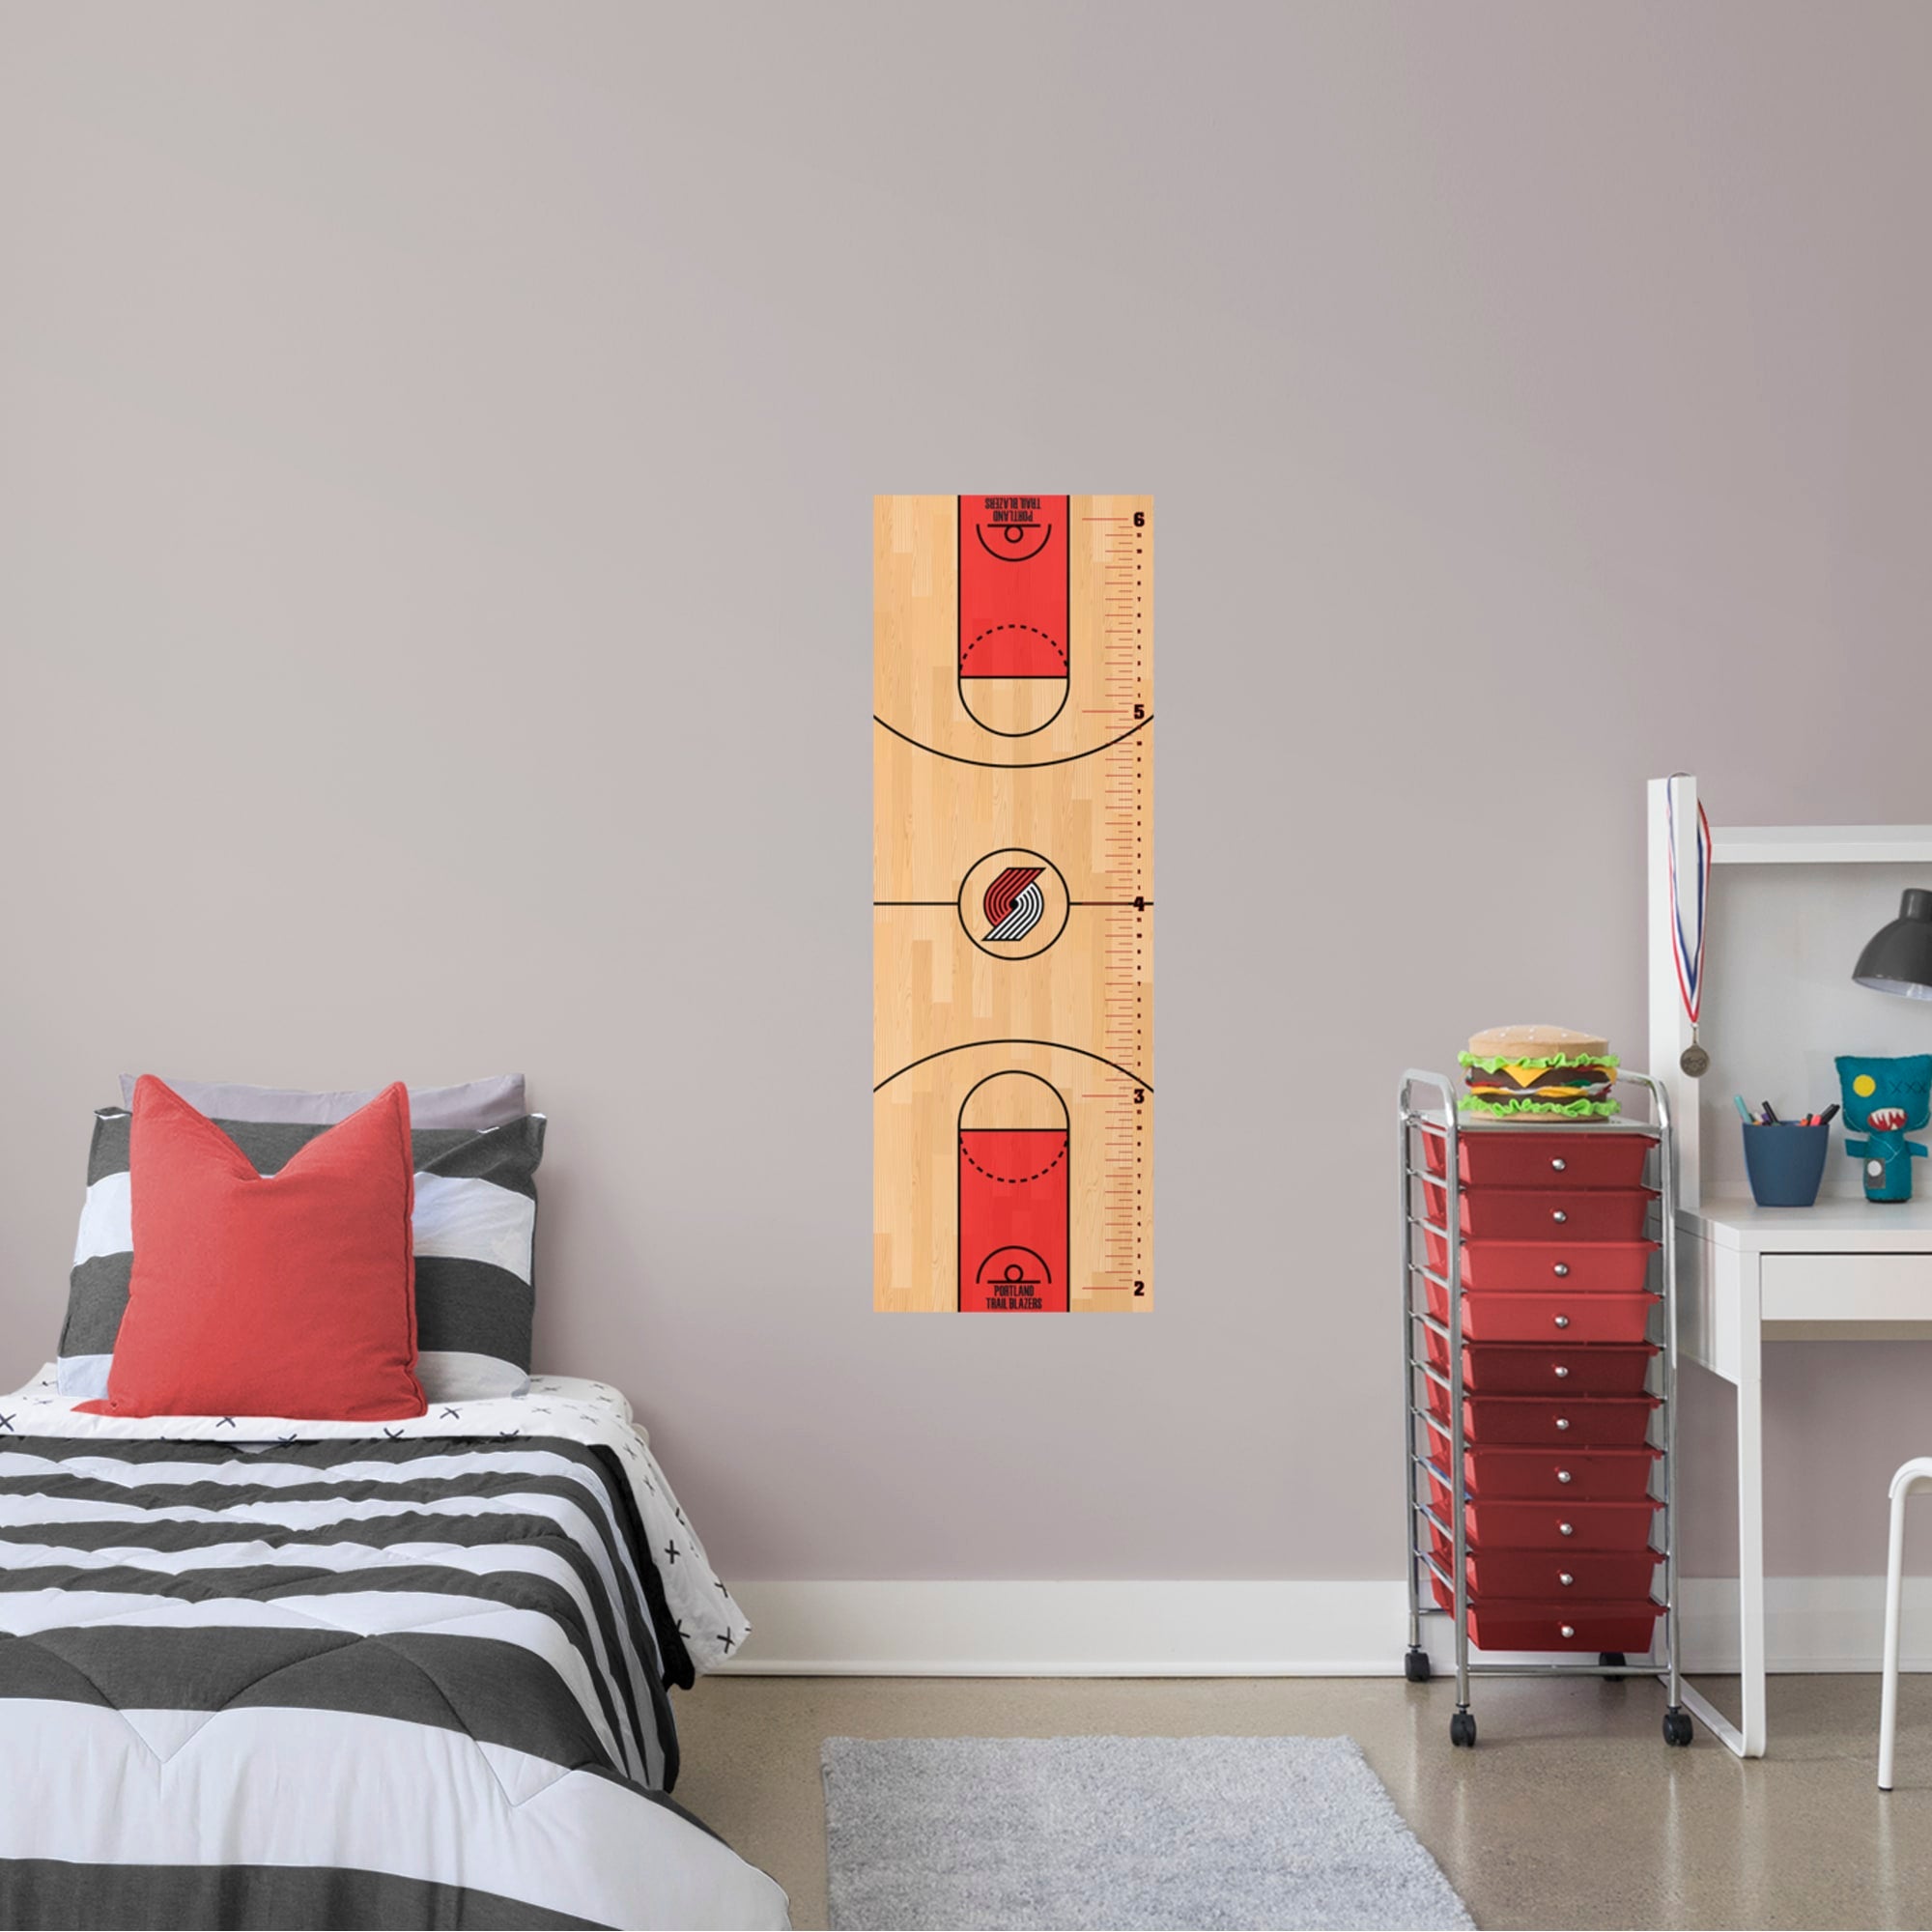 Portland Trail Blazers: Growth Chart - Officially Licensed NBA Removable Wall Decal 17.5"W x 51.0"H by Fathead | Vinyl